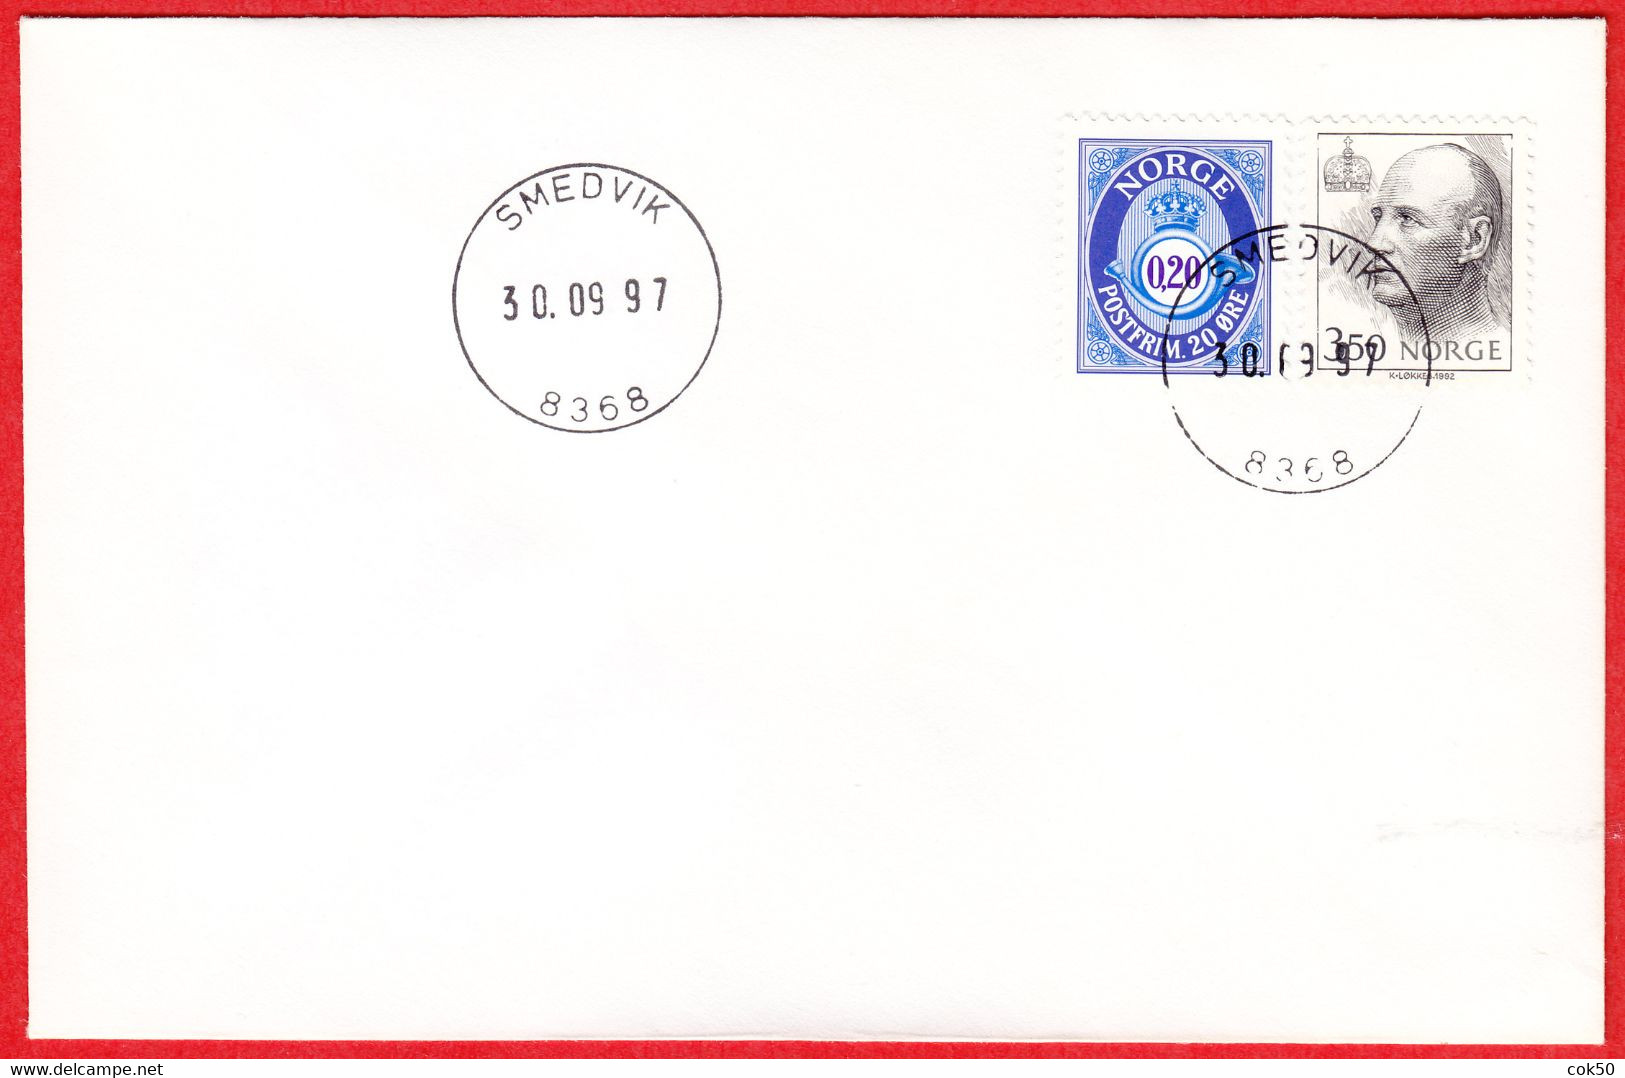 NORWAY -  8368 SMEDVIK - 24 MmØ - (Nordland County) - Last Day/postoffice Closed On 1997.09.30 - Ortsausgaben